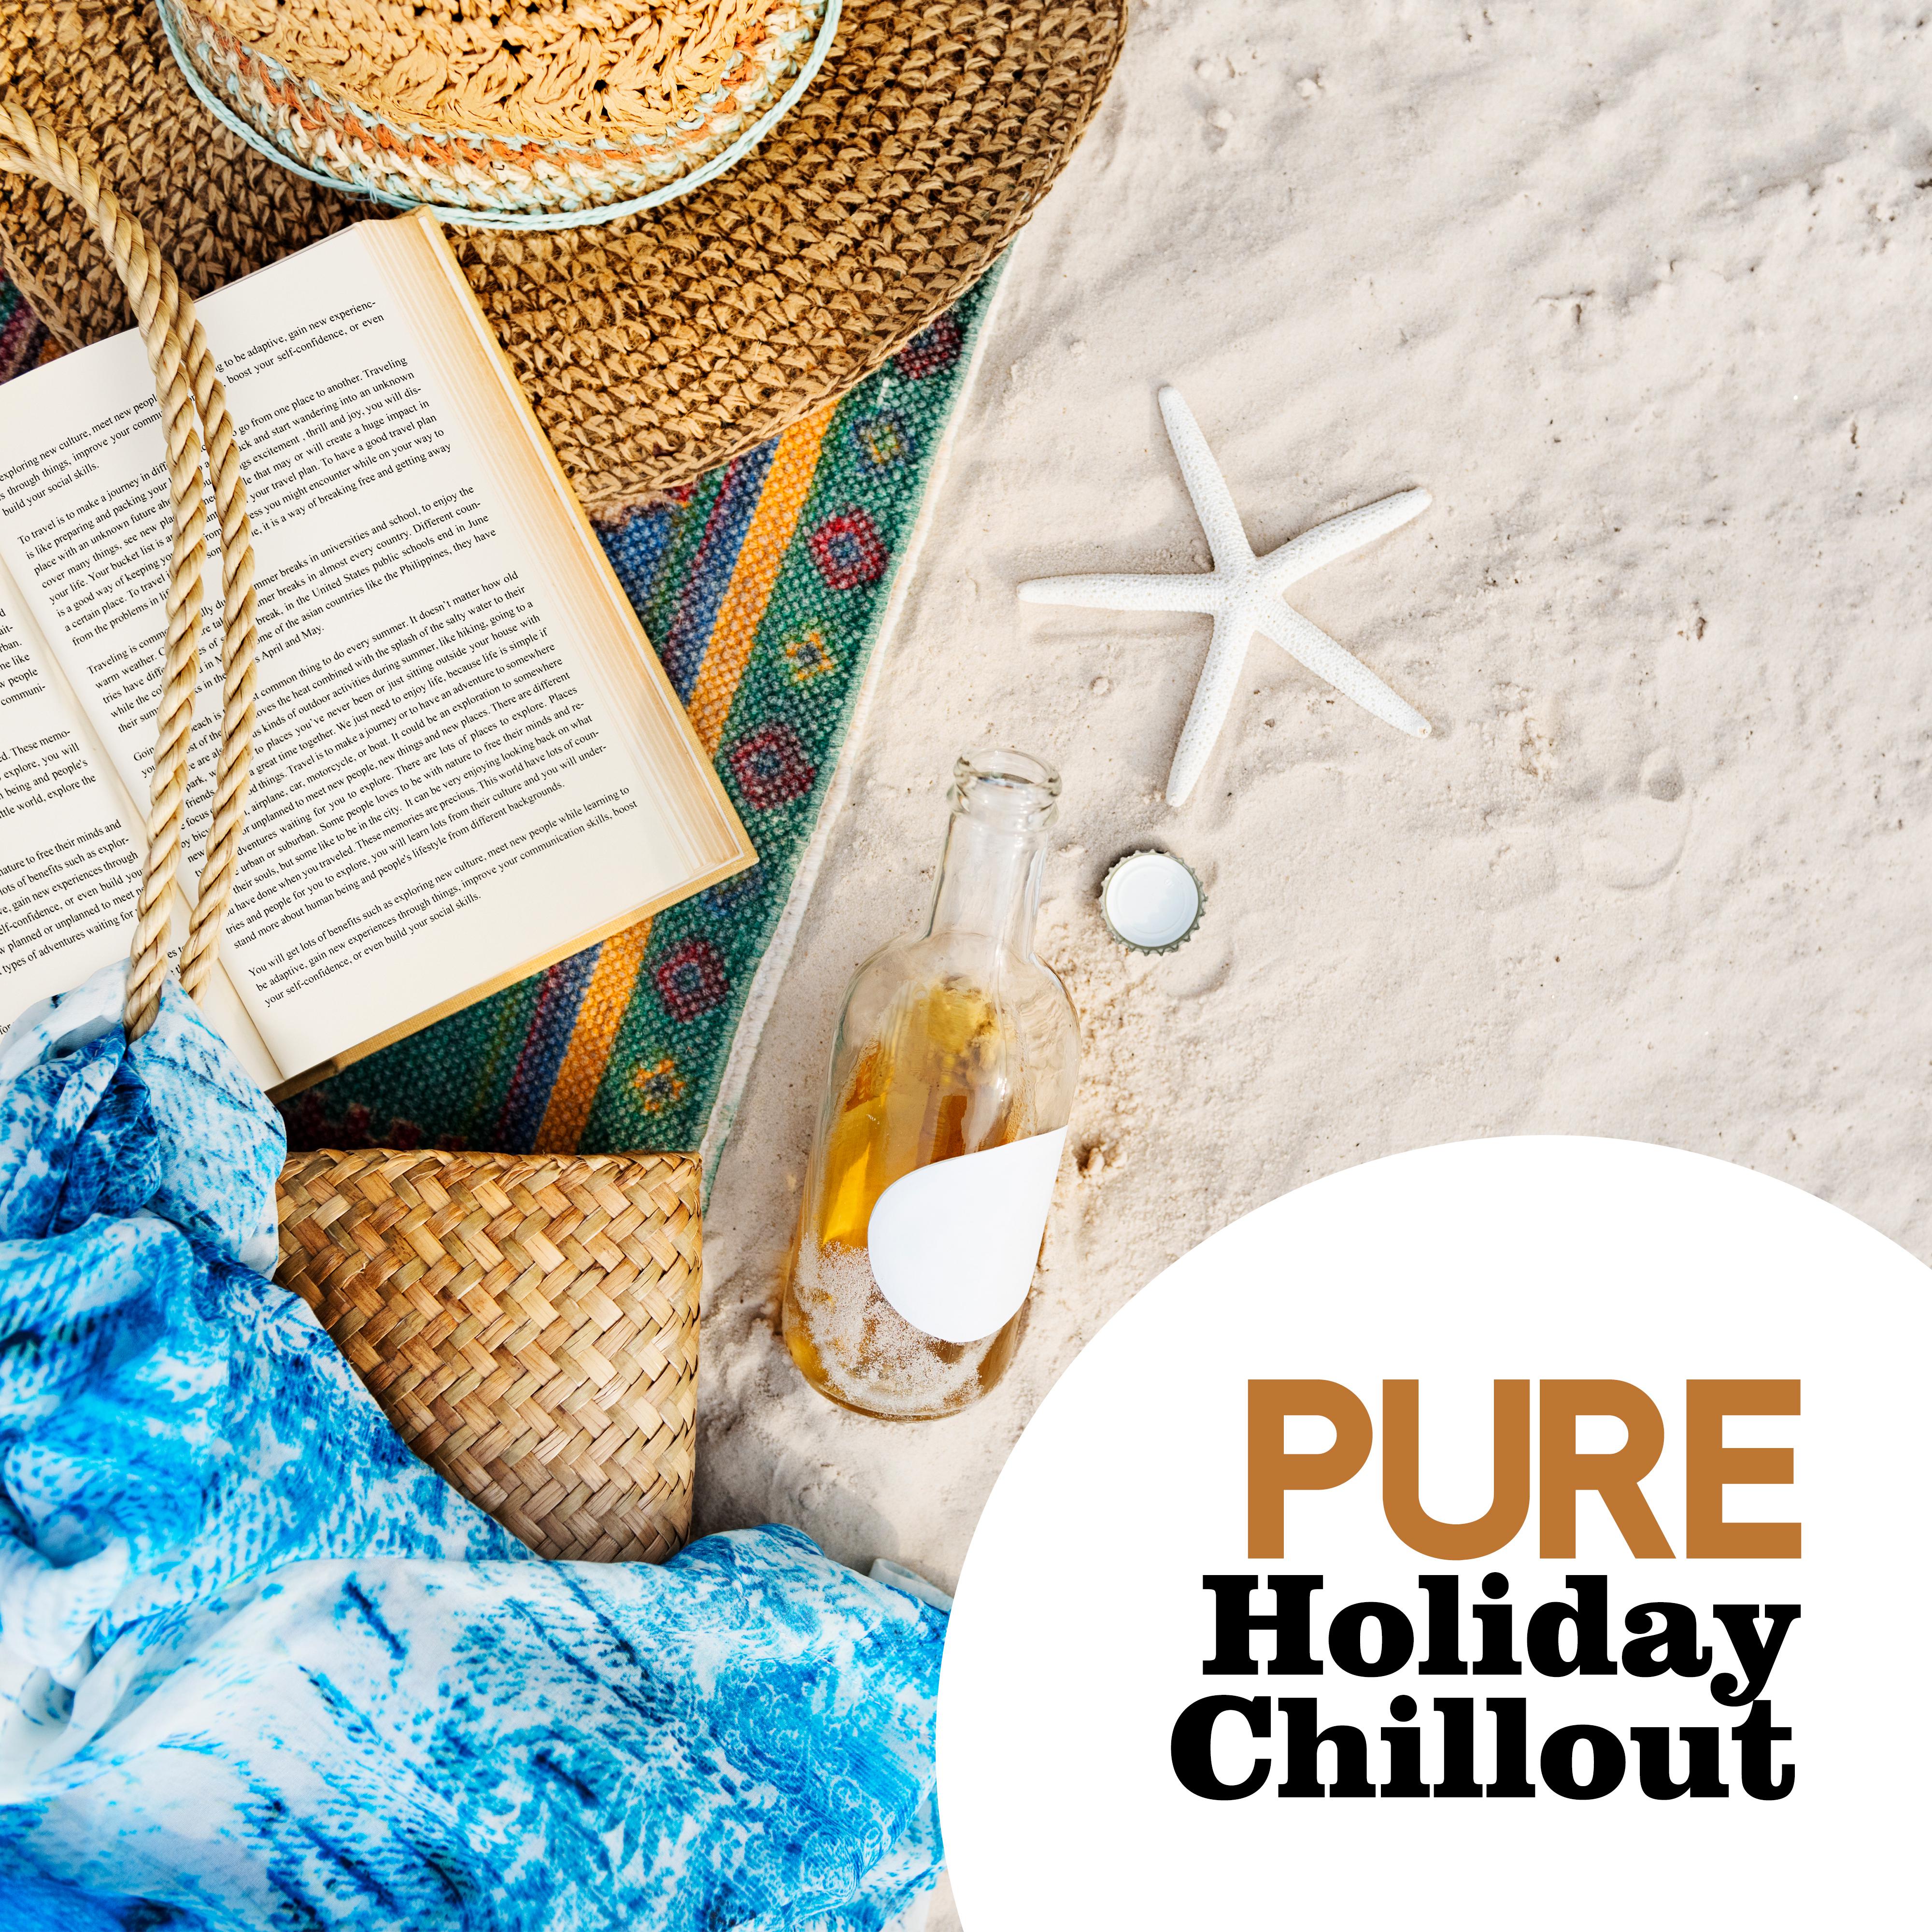 Pure Holiday Chillout